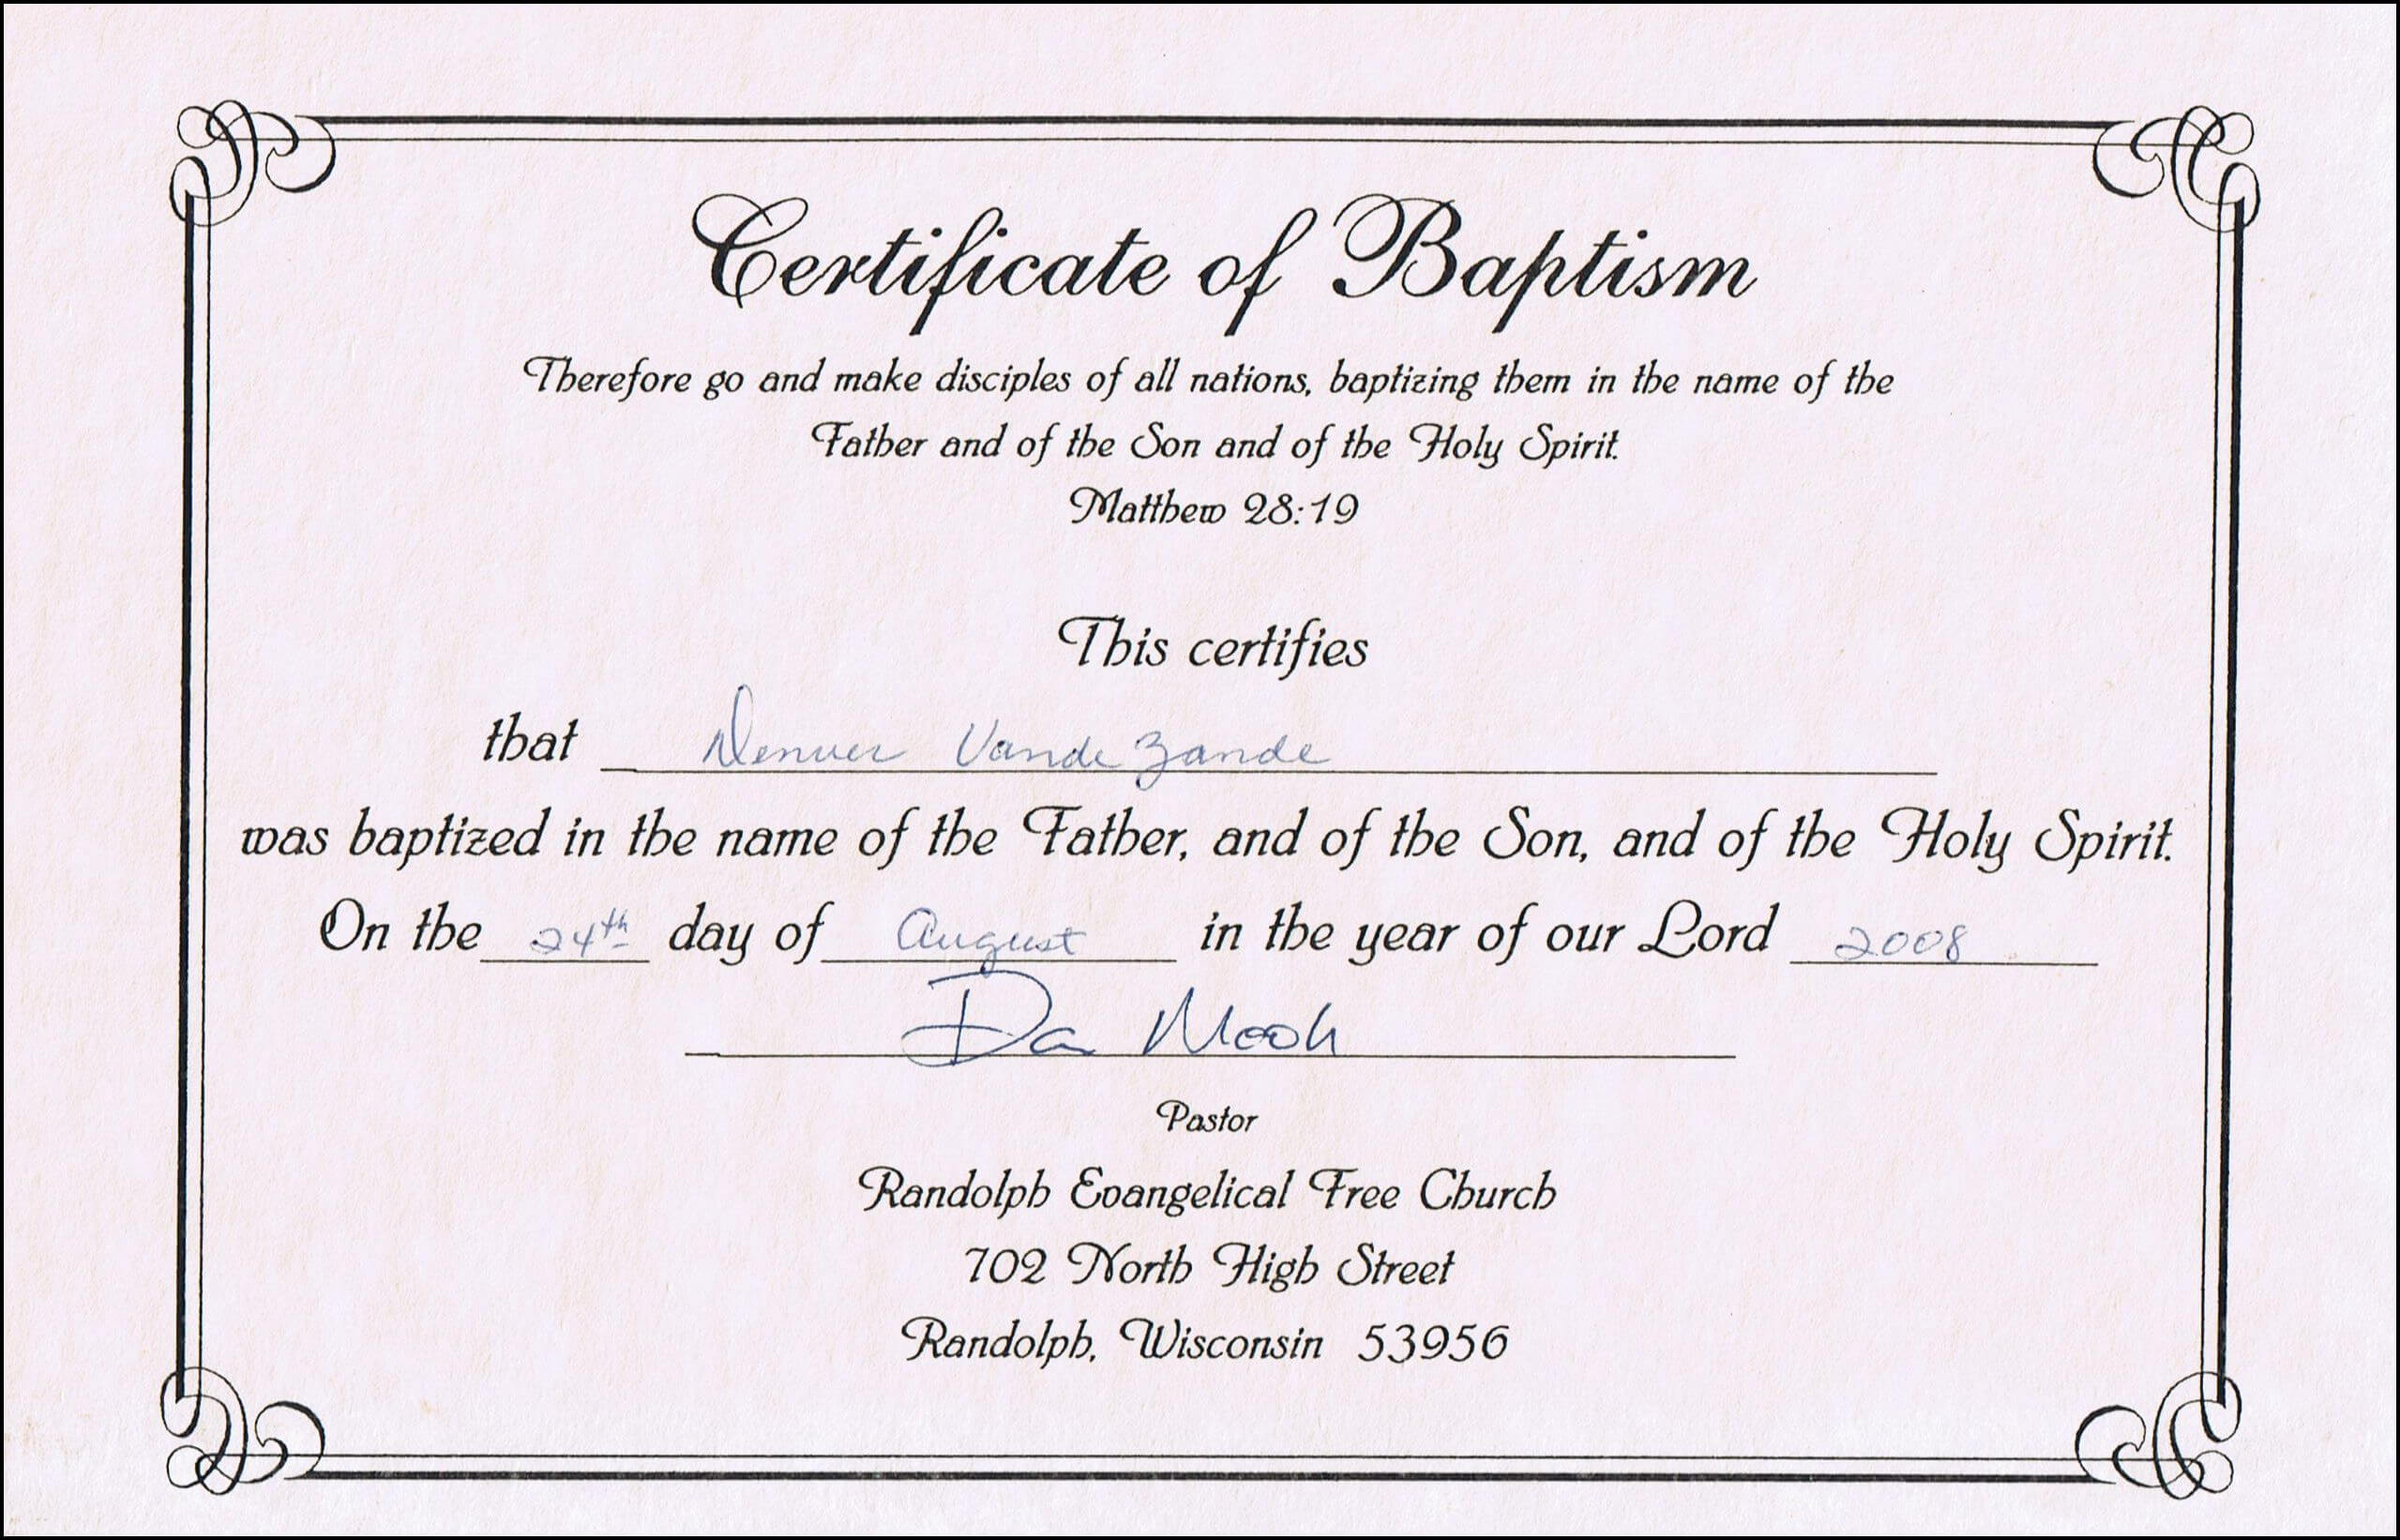 Baptism Certificate Templates For Word | Aspects Of Beauty Throughout Christian Baptism Certificate Template